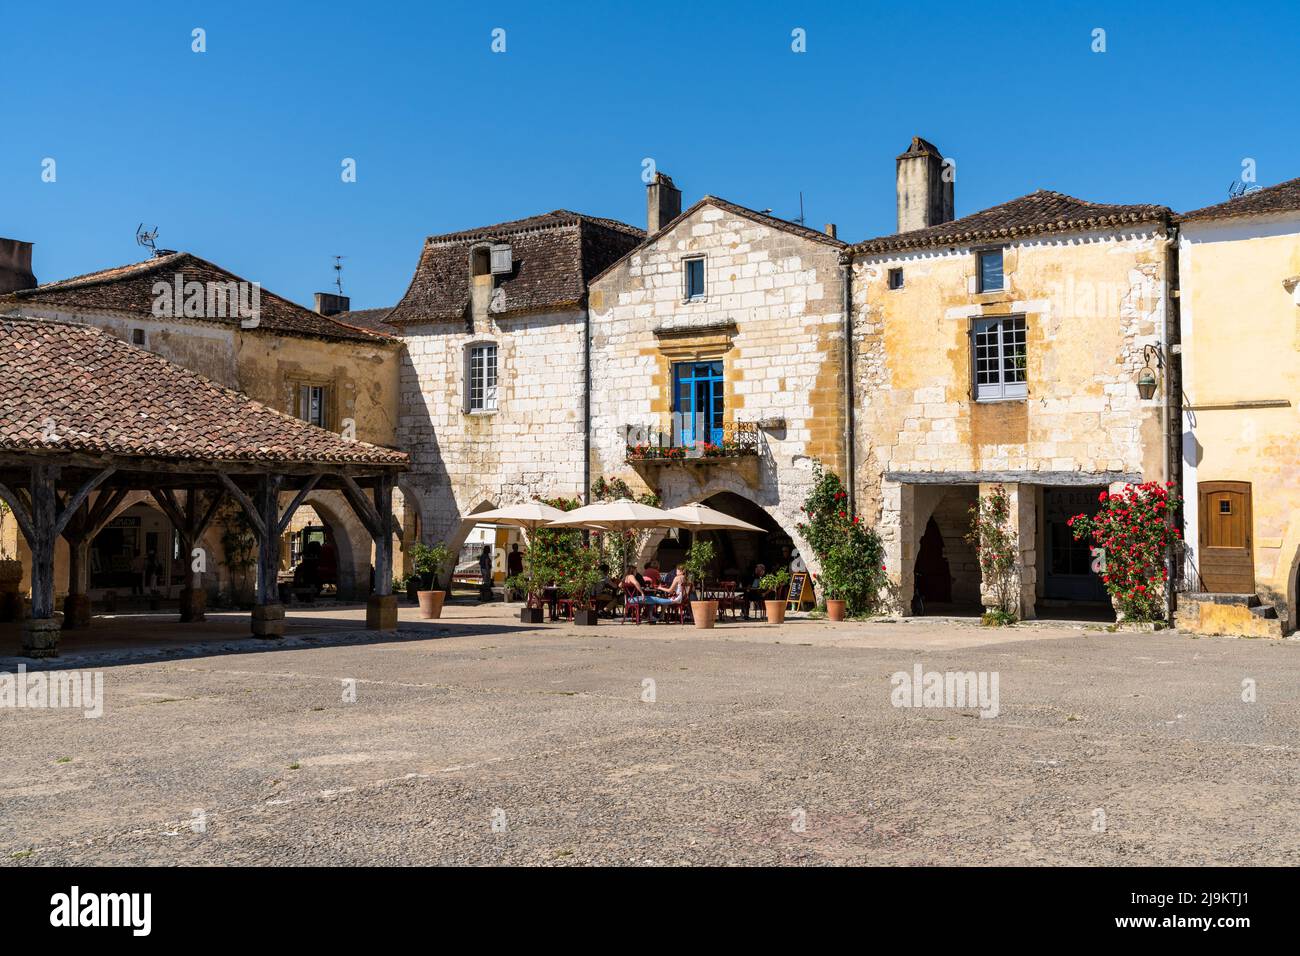 Monpazier, France - 11 May, 2022: view of the Place des Cornieres Square in the historic city center of Monpazier Stock Photo